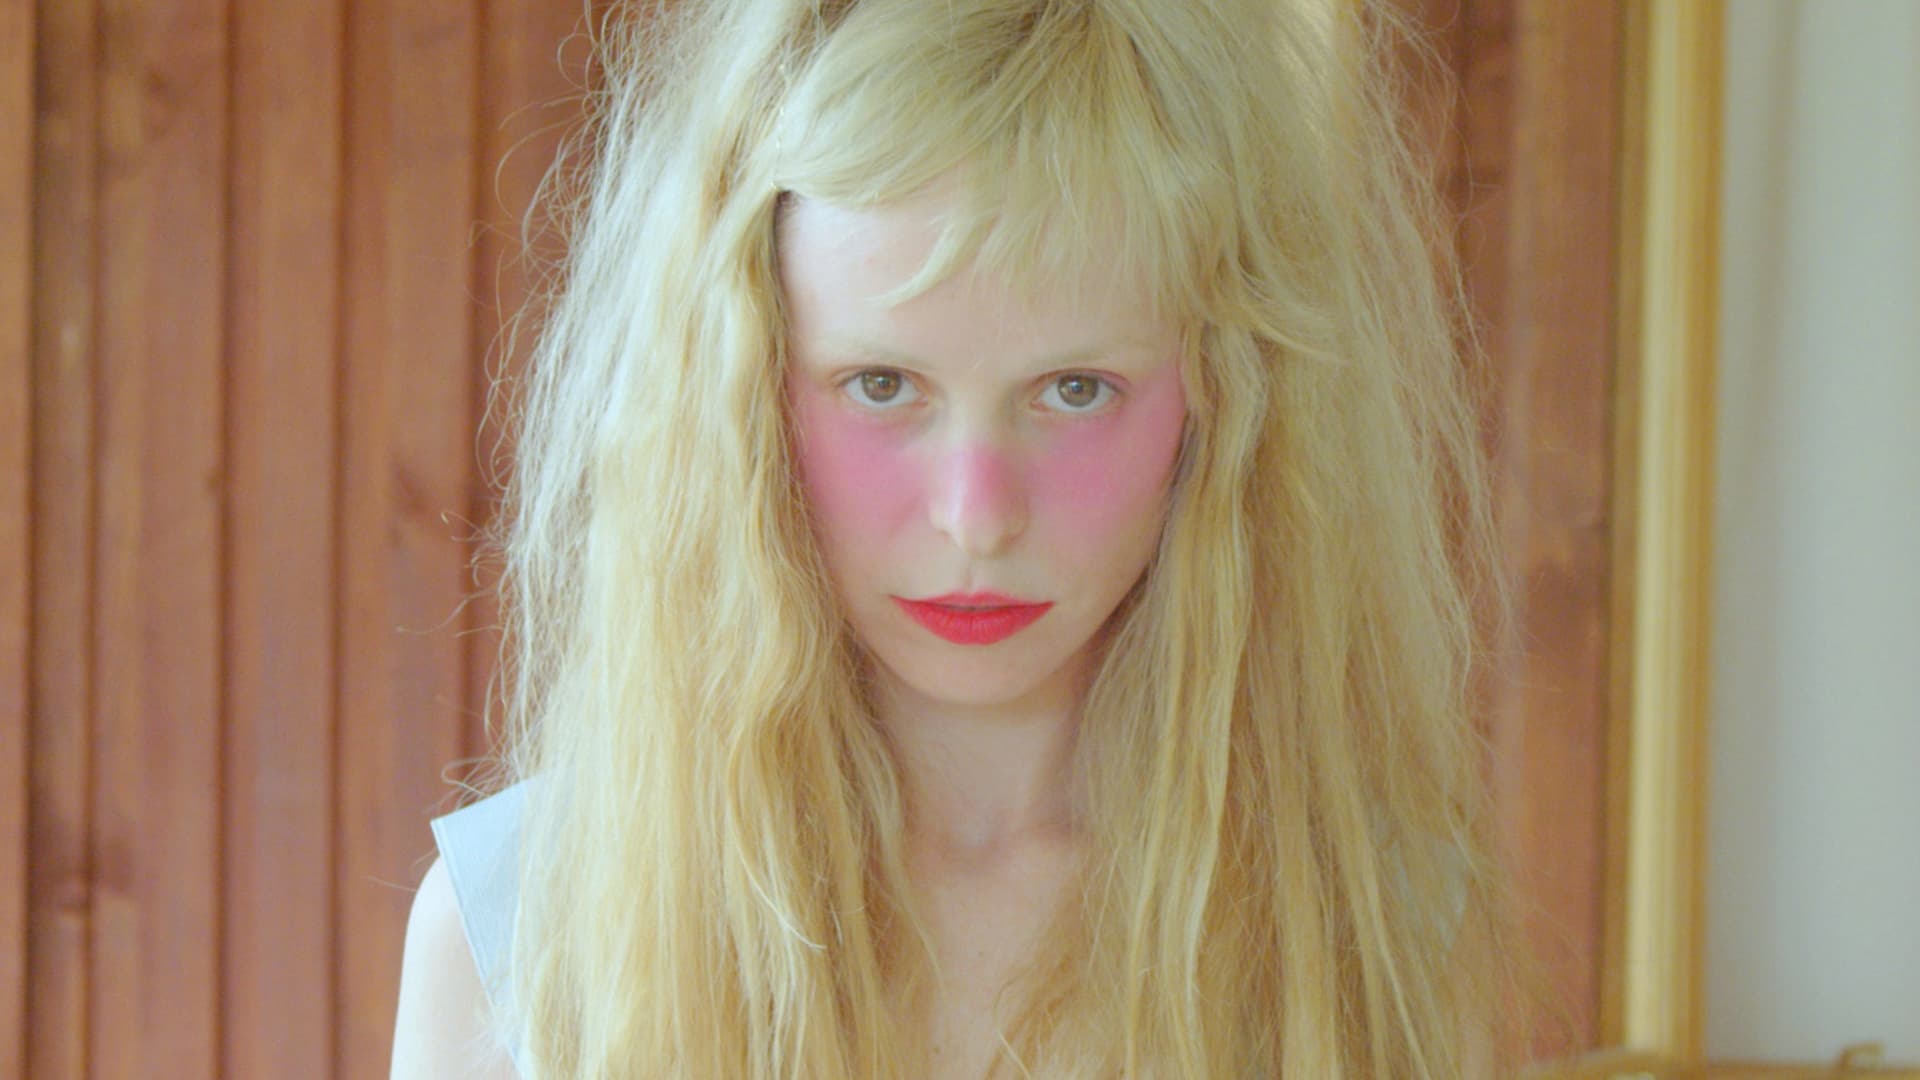 best actresses, Cancer Celebrities, Cancer Models, Cancer Singers, famous hollywood stars, hollywood celebrities, hottest celebrities, Hottest Israeli celebrities, how old is Petite Meller, how tall is Petite Meller, Israeli Celebrities, most beautiful Israeli Celebrities, most beautiful Israeli Singers, most famous Israeli Celebrities, Petite Meller age, Petite Meller bikini, Petite Meller boyfriend, Petite Meller bra size, Petite Meller breast size, Petite Meller dress size, Petite Meller eyes color, Petite Meller feet size, Petite Meller full-body statistics, Petite Meller height, Petite Meller Measurements, Petite Meller net worth, Petite Meller personal info, Petite Meller shoe, Petite Meller songs, Petite Meller weight, Zodiac Celebrities, Zodiac Singers